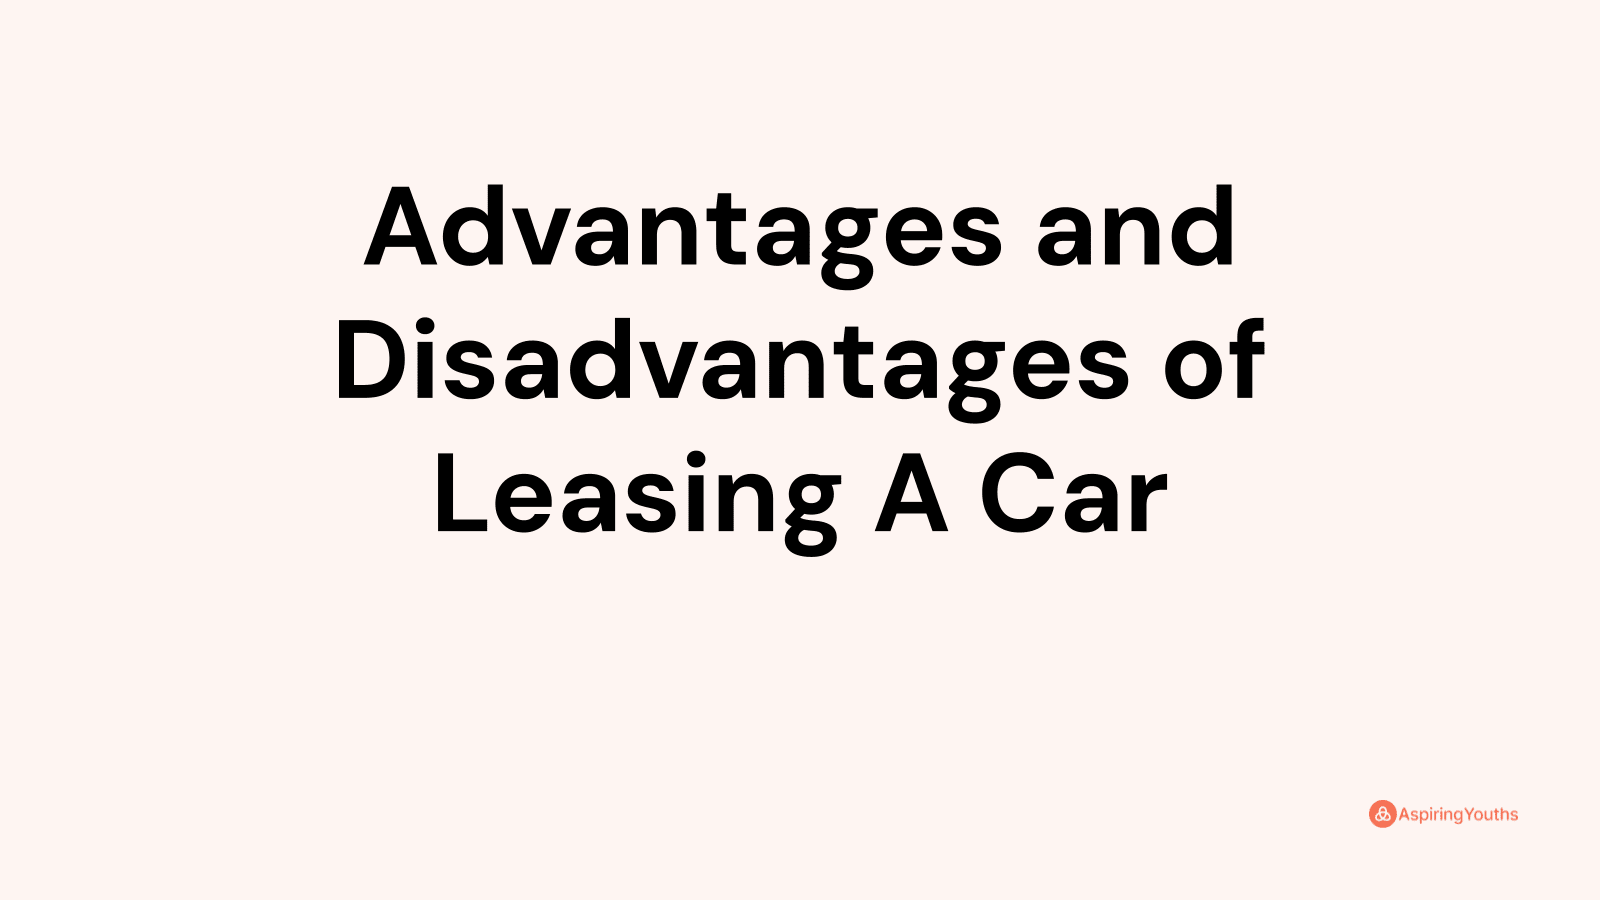 Advantages and disadvantages of Leasing A Car